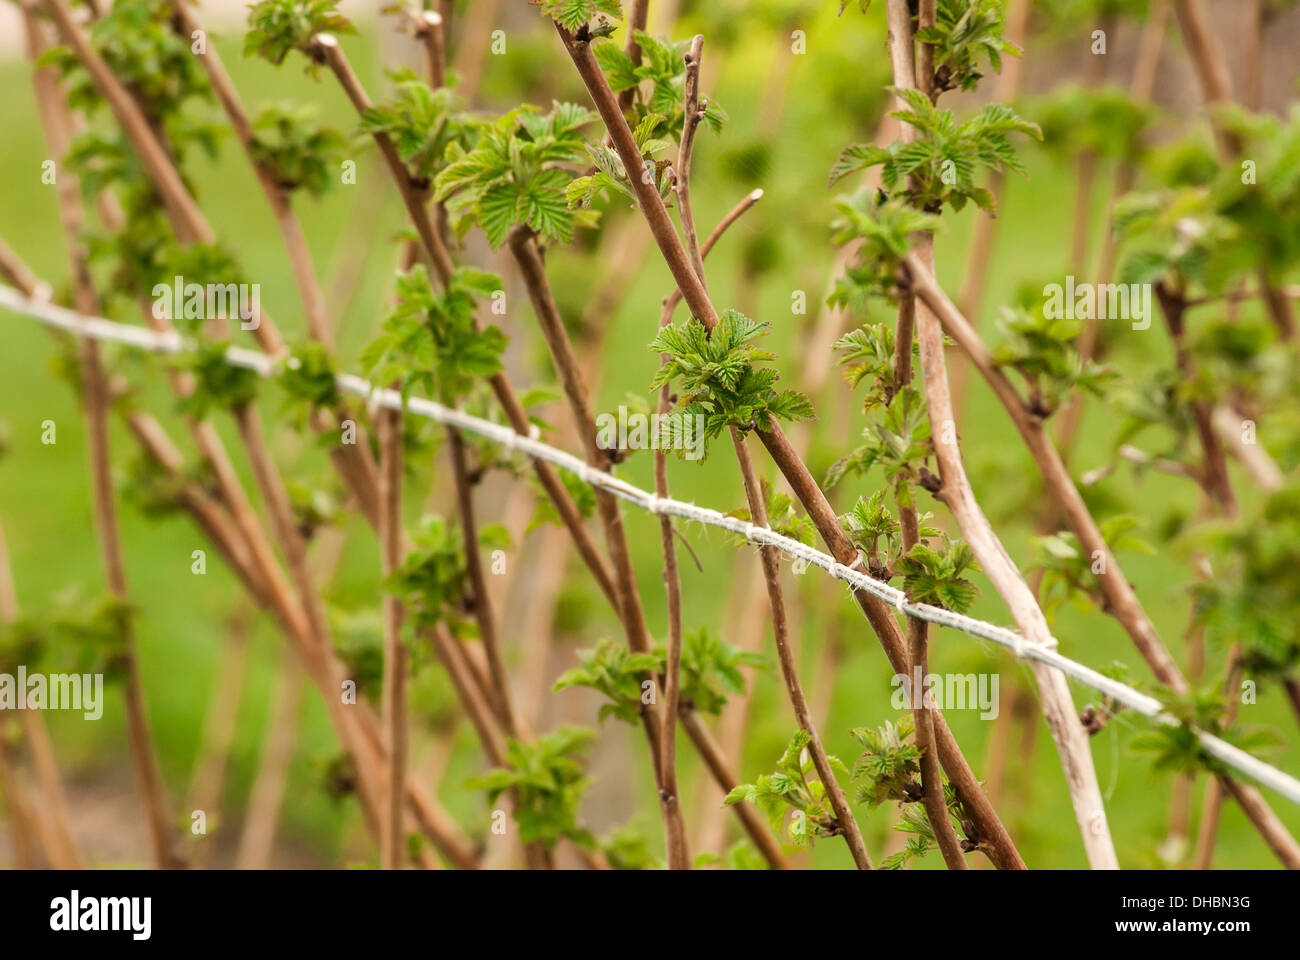 Raspberry, Rubus idaeus 'Glen rosa', growing outdoor on the bush against wire support. Stock Photo